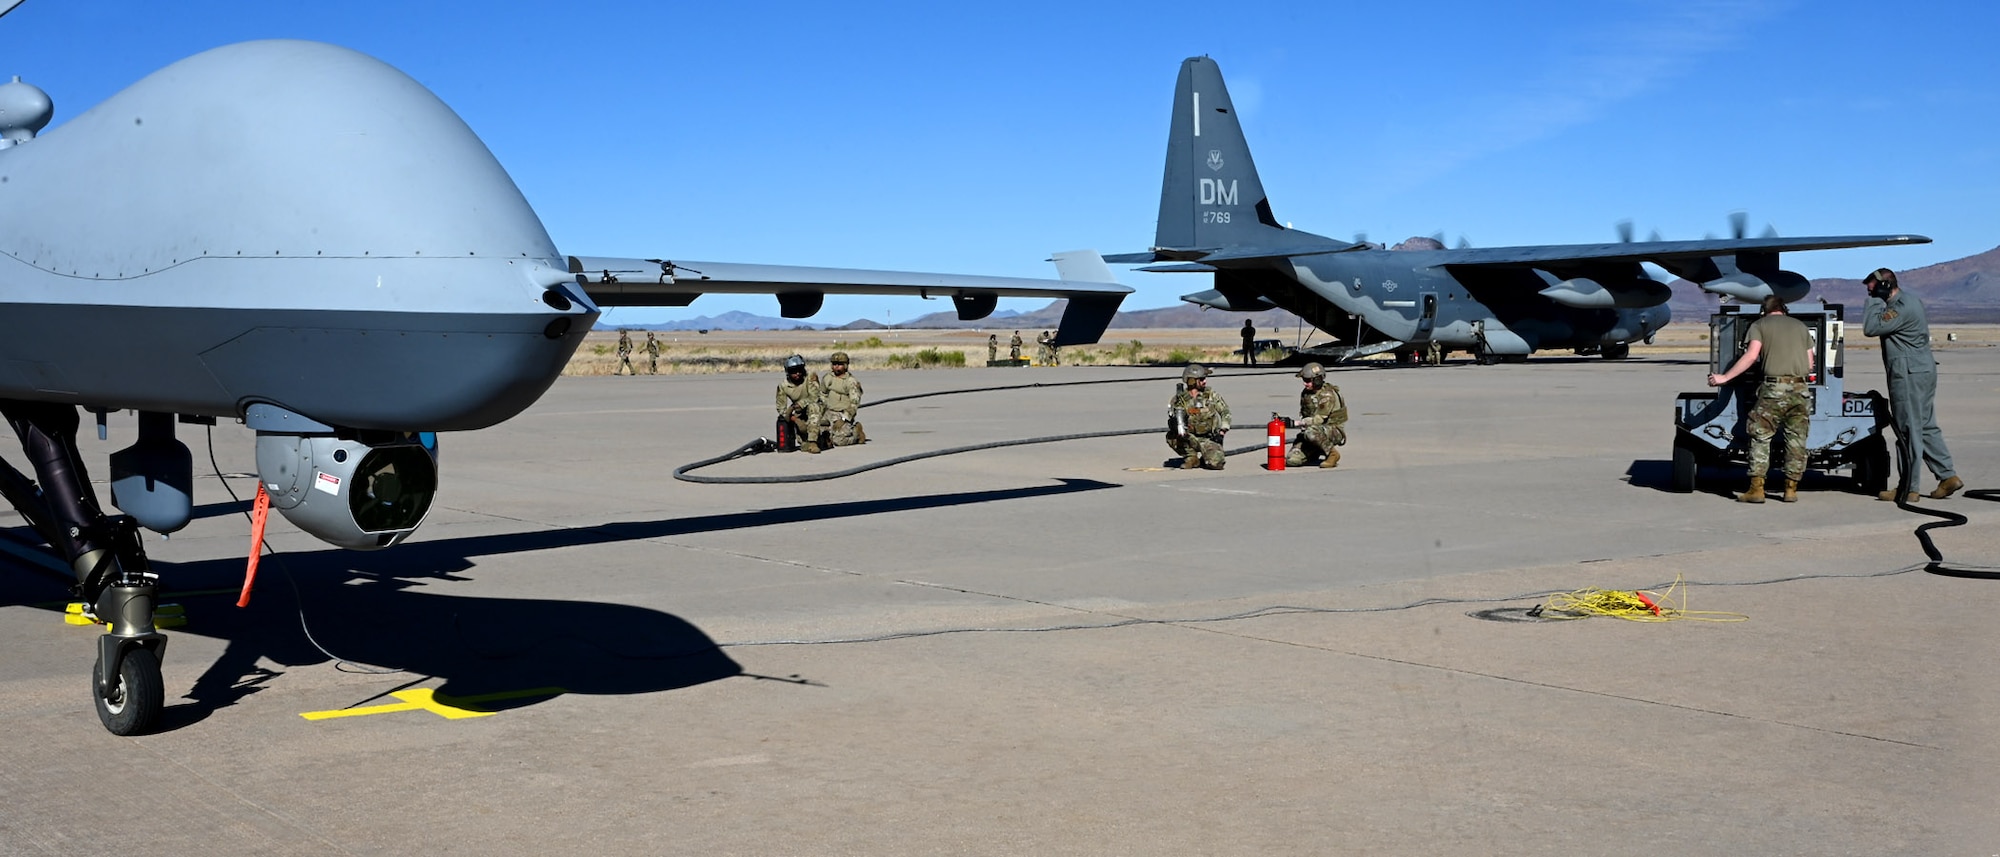 U.S. Airmen assigned to the 355th Logistics Readiness Squadron prepare for a forward area refueling point during Exercise Agile Angel at Fort Huachuca, Ariz., Feb. 20, 2024. The purpose of FARP operators was to expeditiously transfer fuel from a tanker aircraft into a receiver aircraft, while aircraft engines remain on. (U.S. Air Force photo by Staff Sgt. Abbey Rieves)